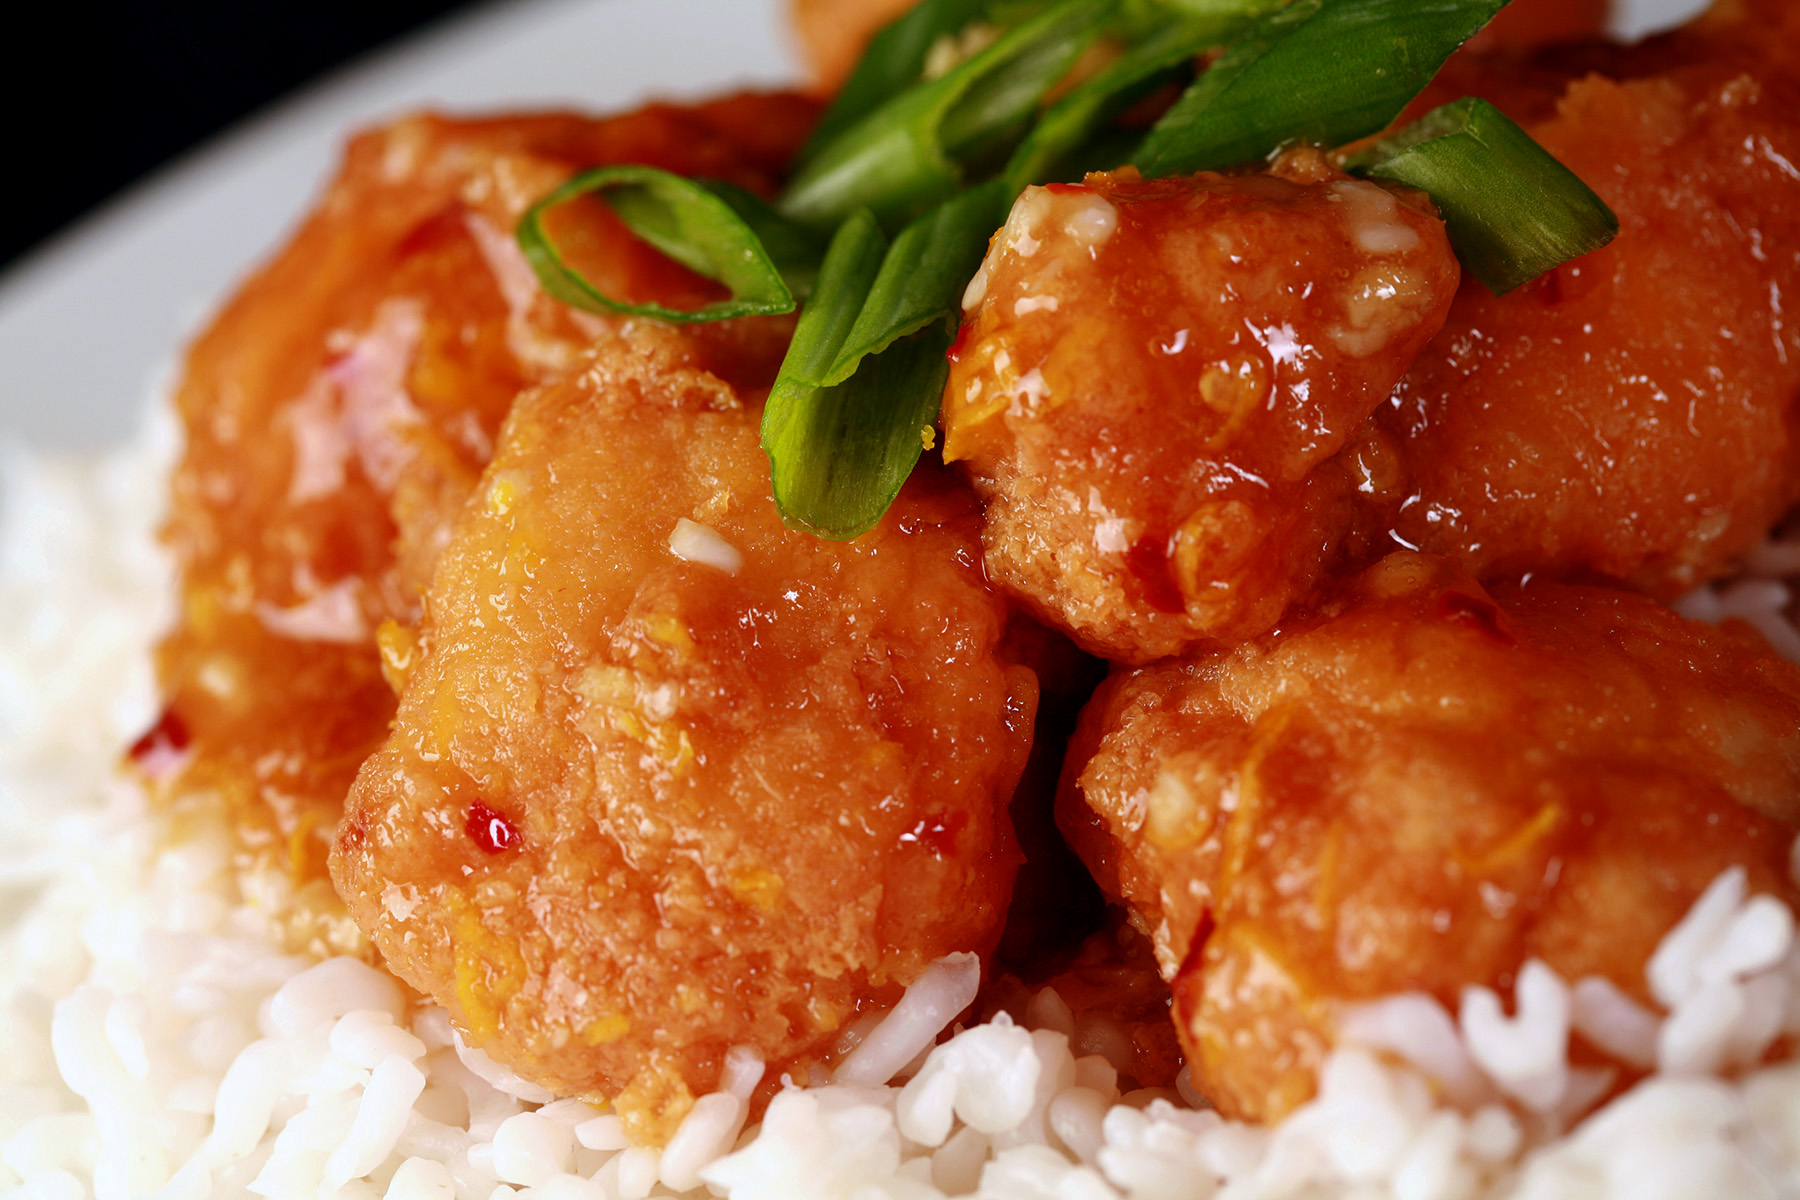 A plate of sugar-free spicy orange chicken served on konjac rice.